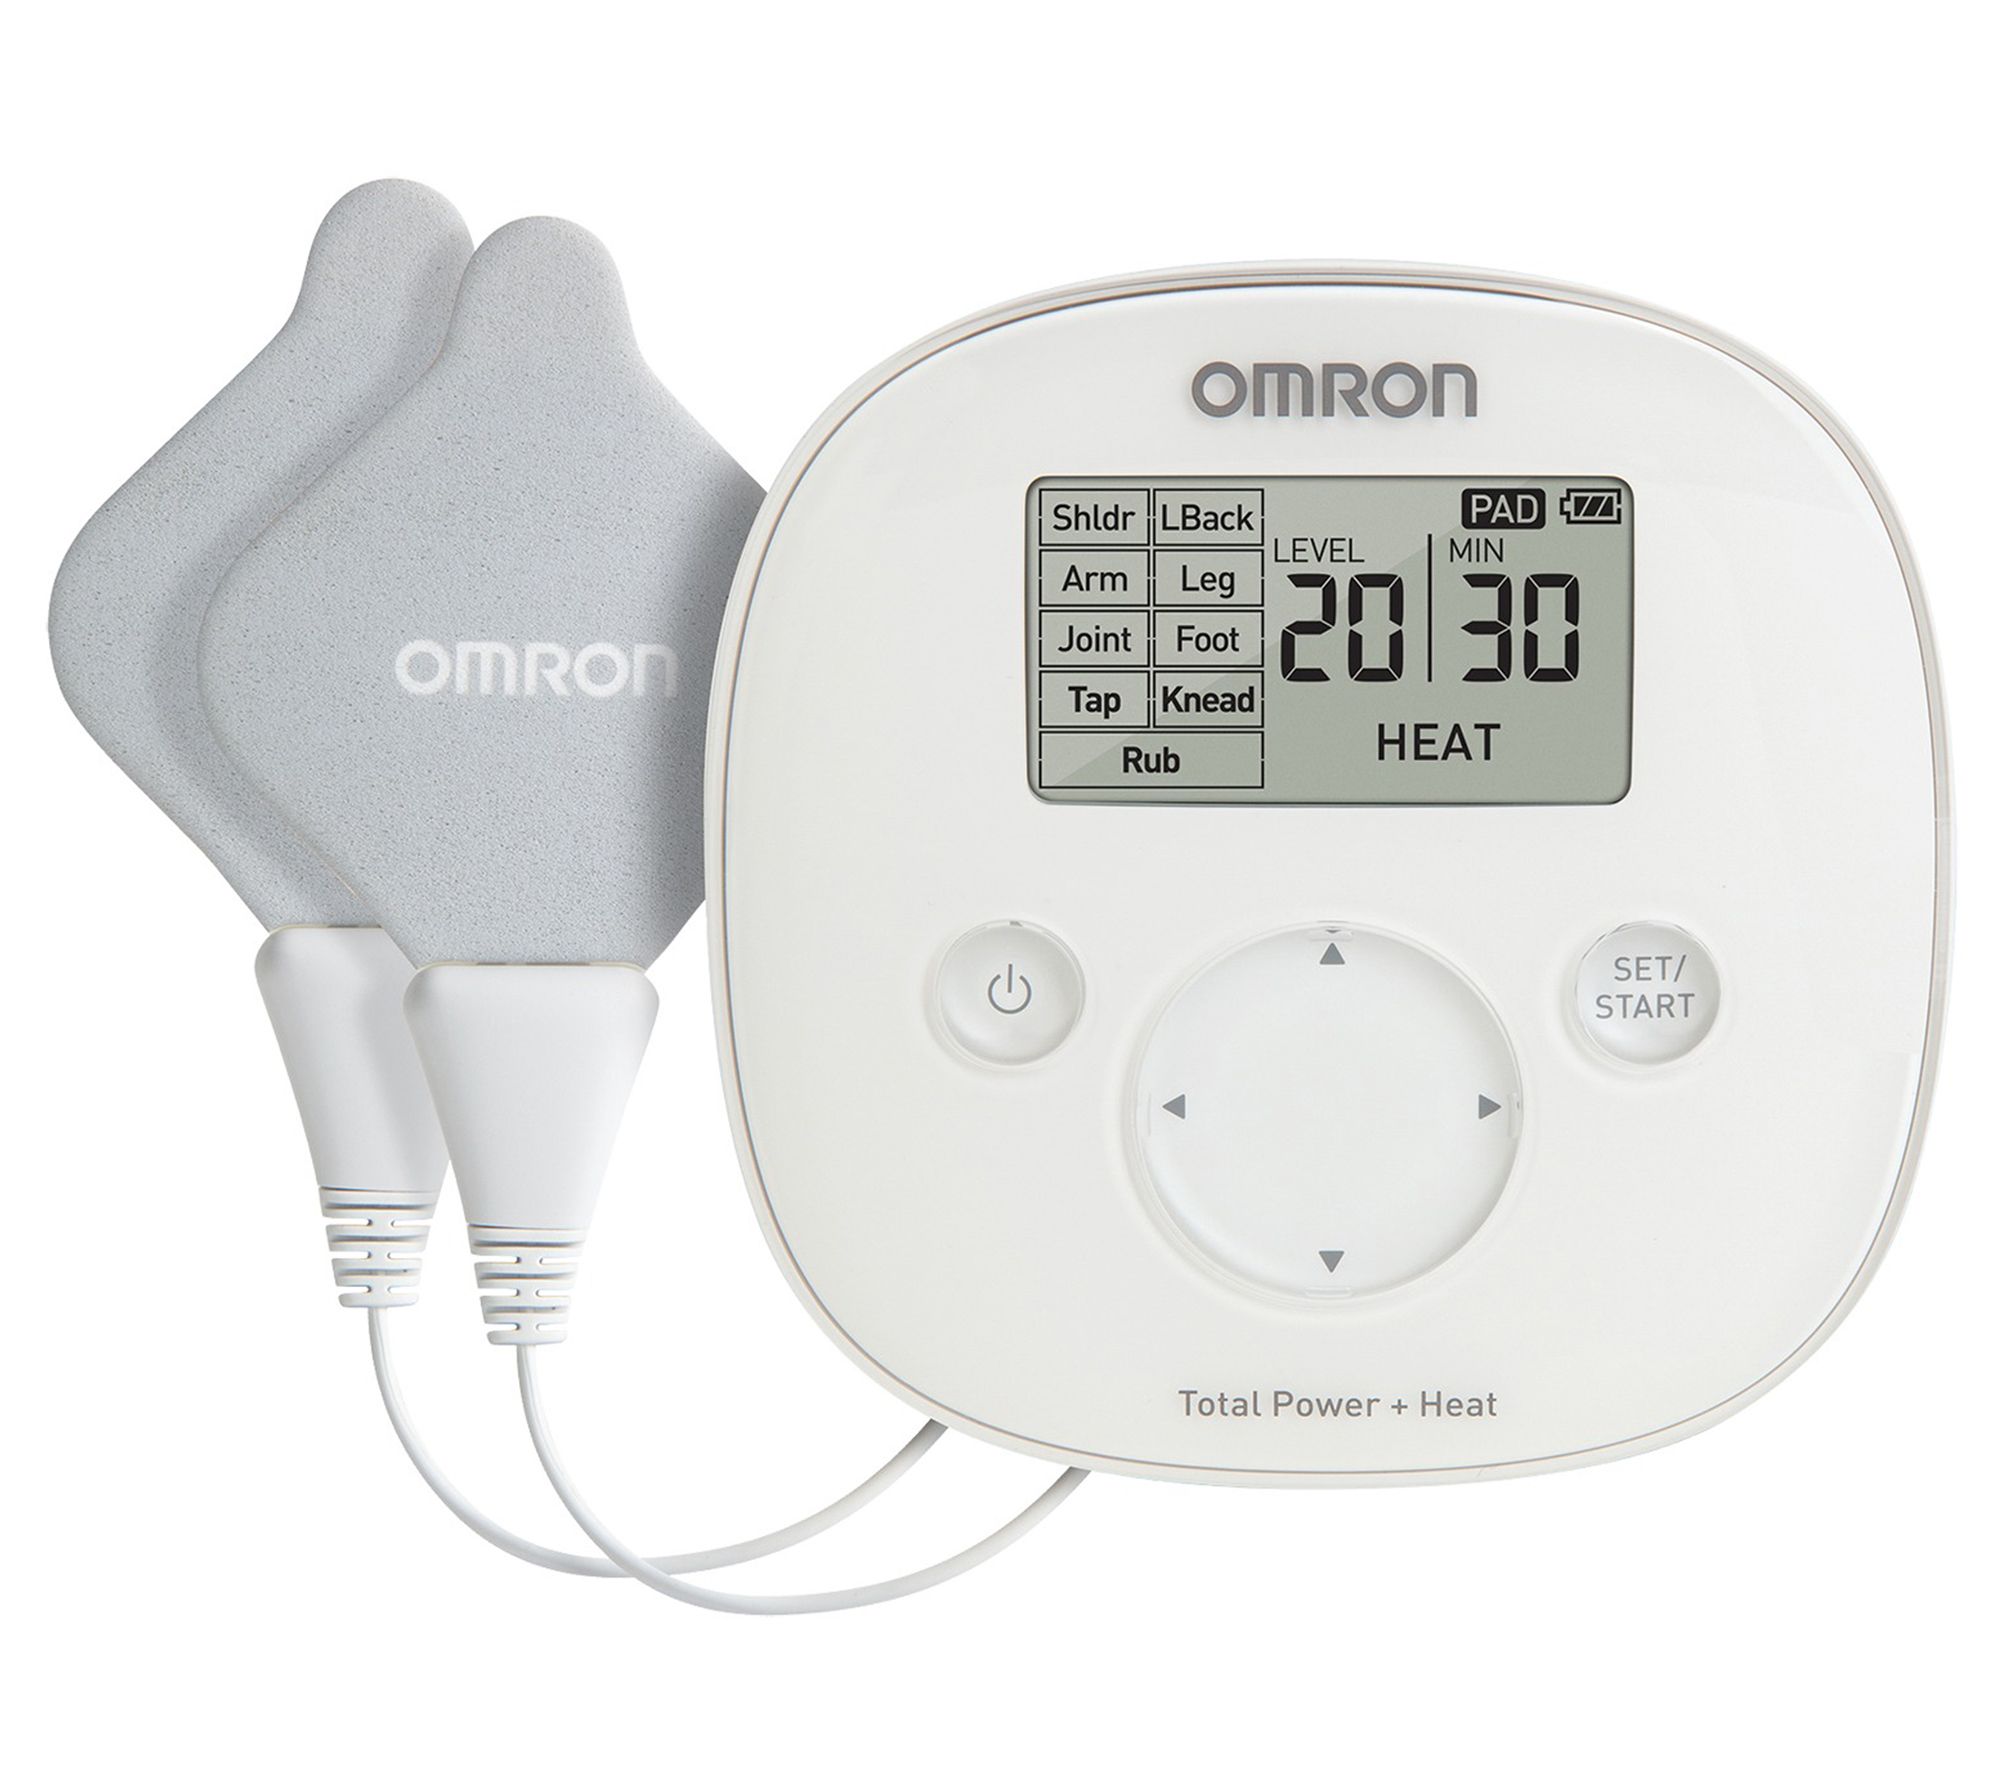 OMRON Electric Therapy Pocket Pain Pro 5 Modes 10 Power Levels